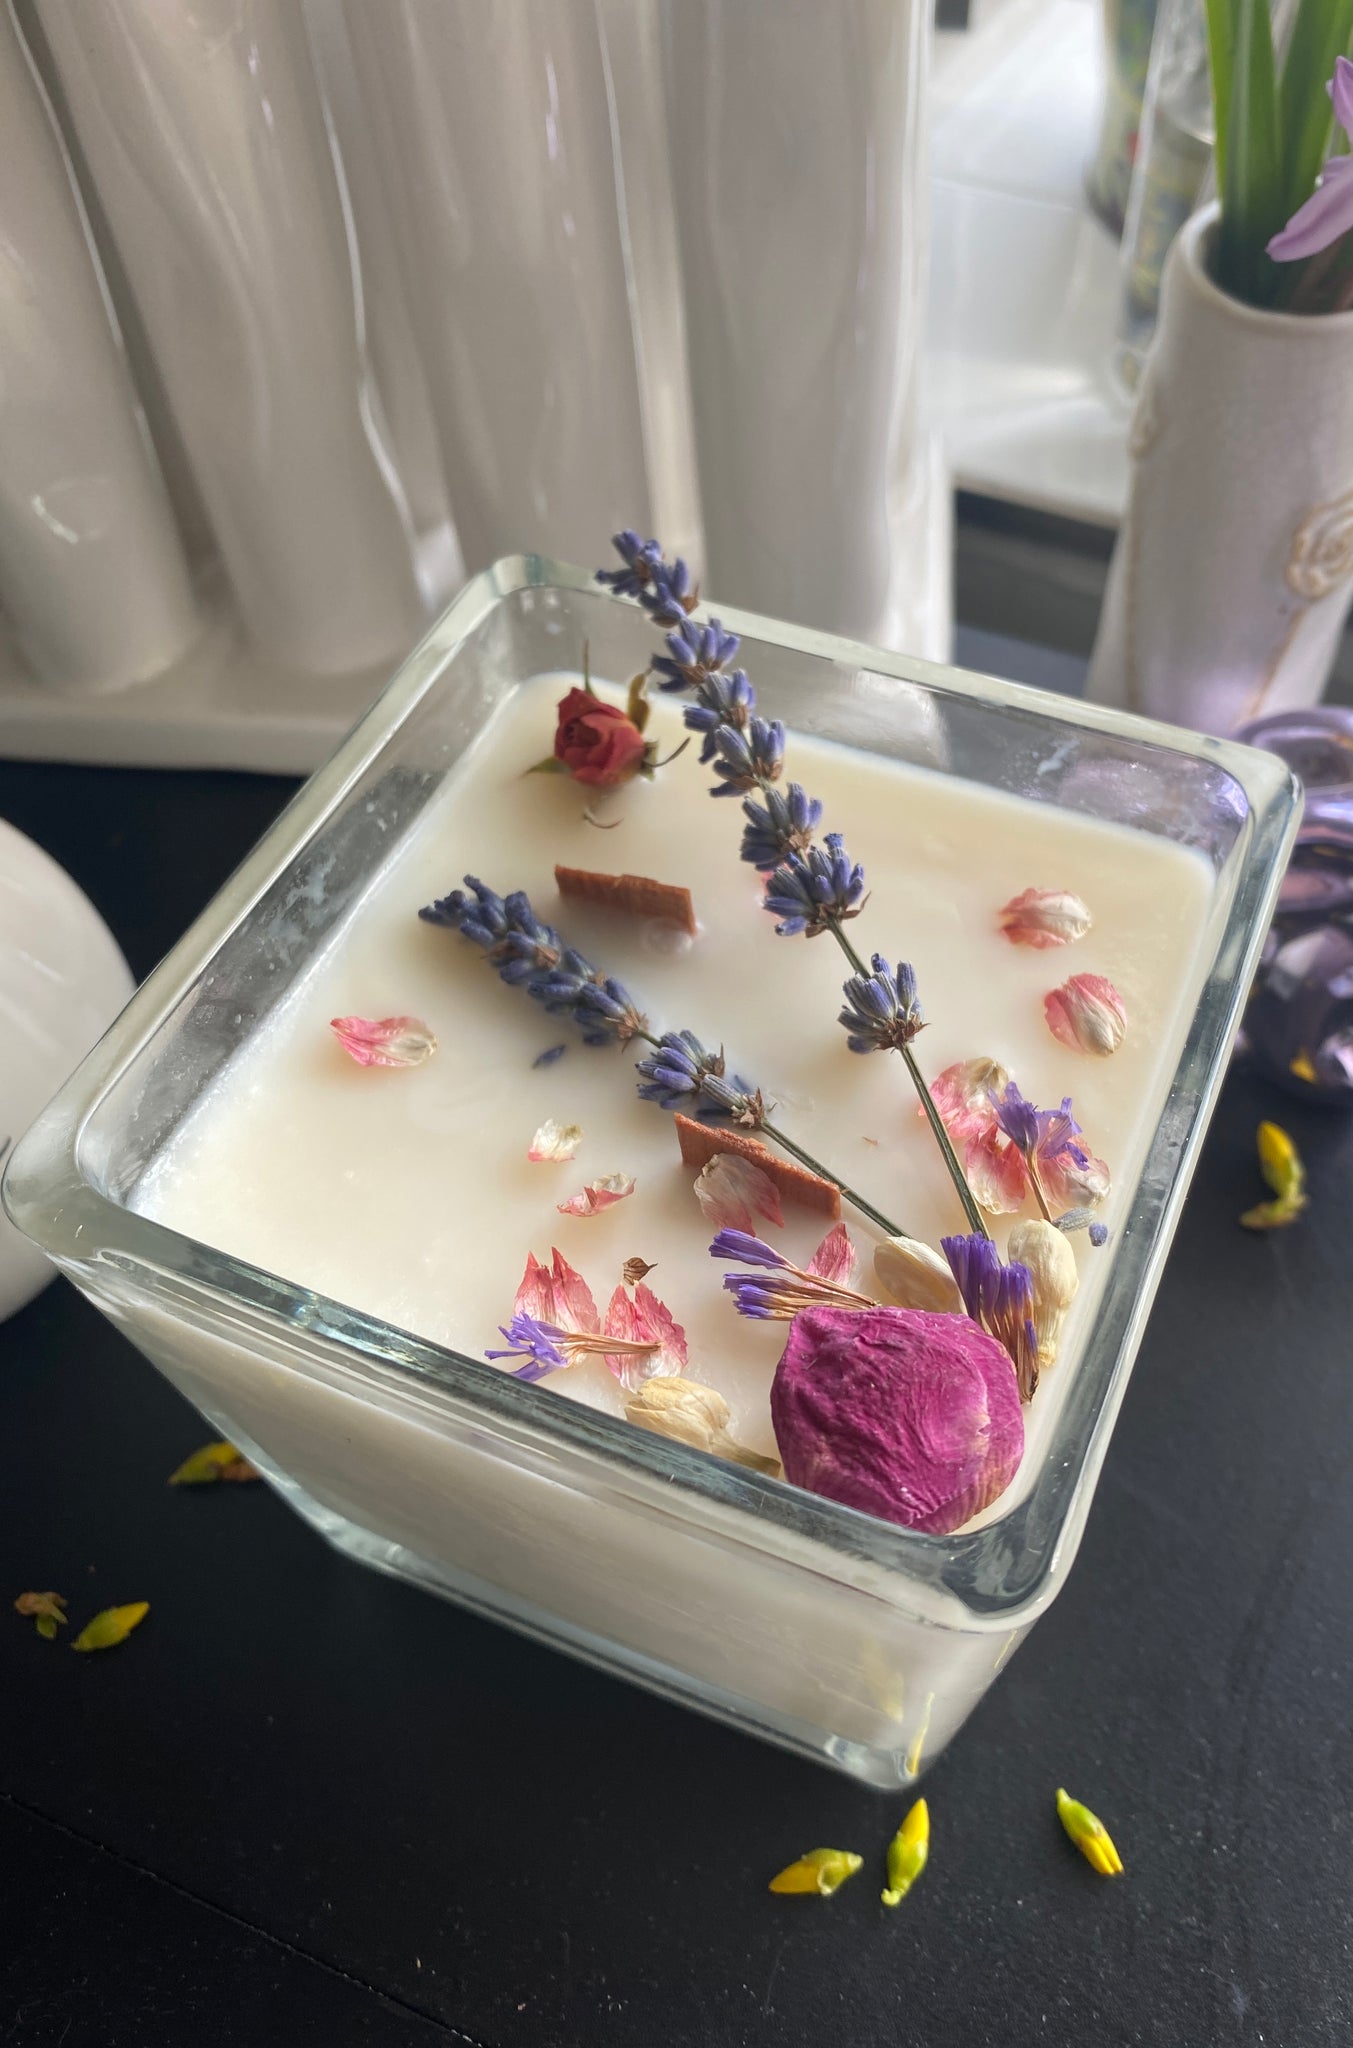 CANDLE DECORATED WITH DRIED FLOWERS